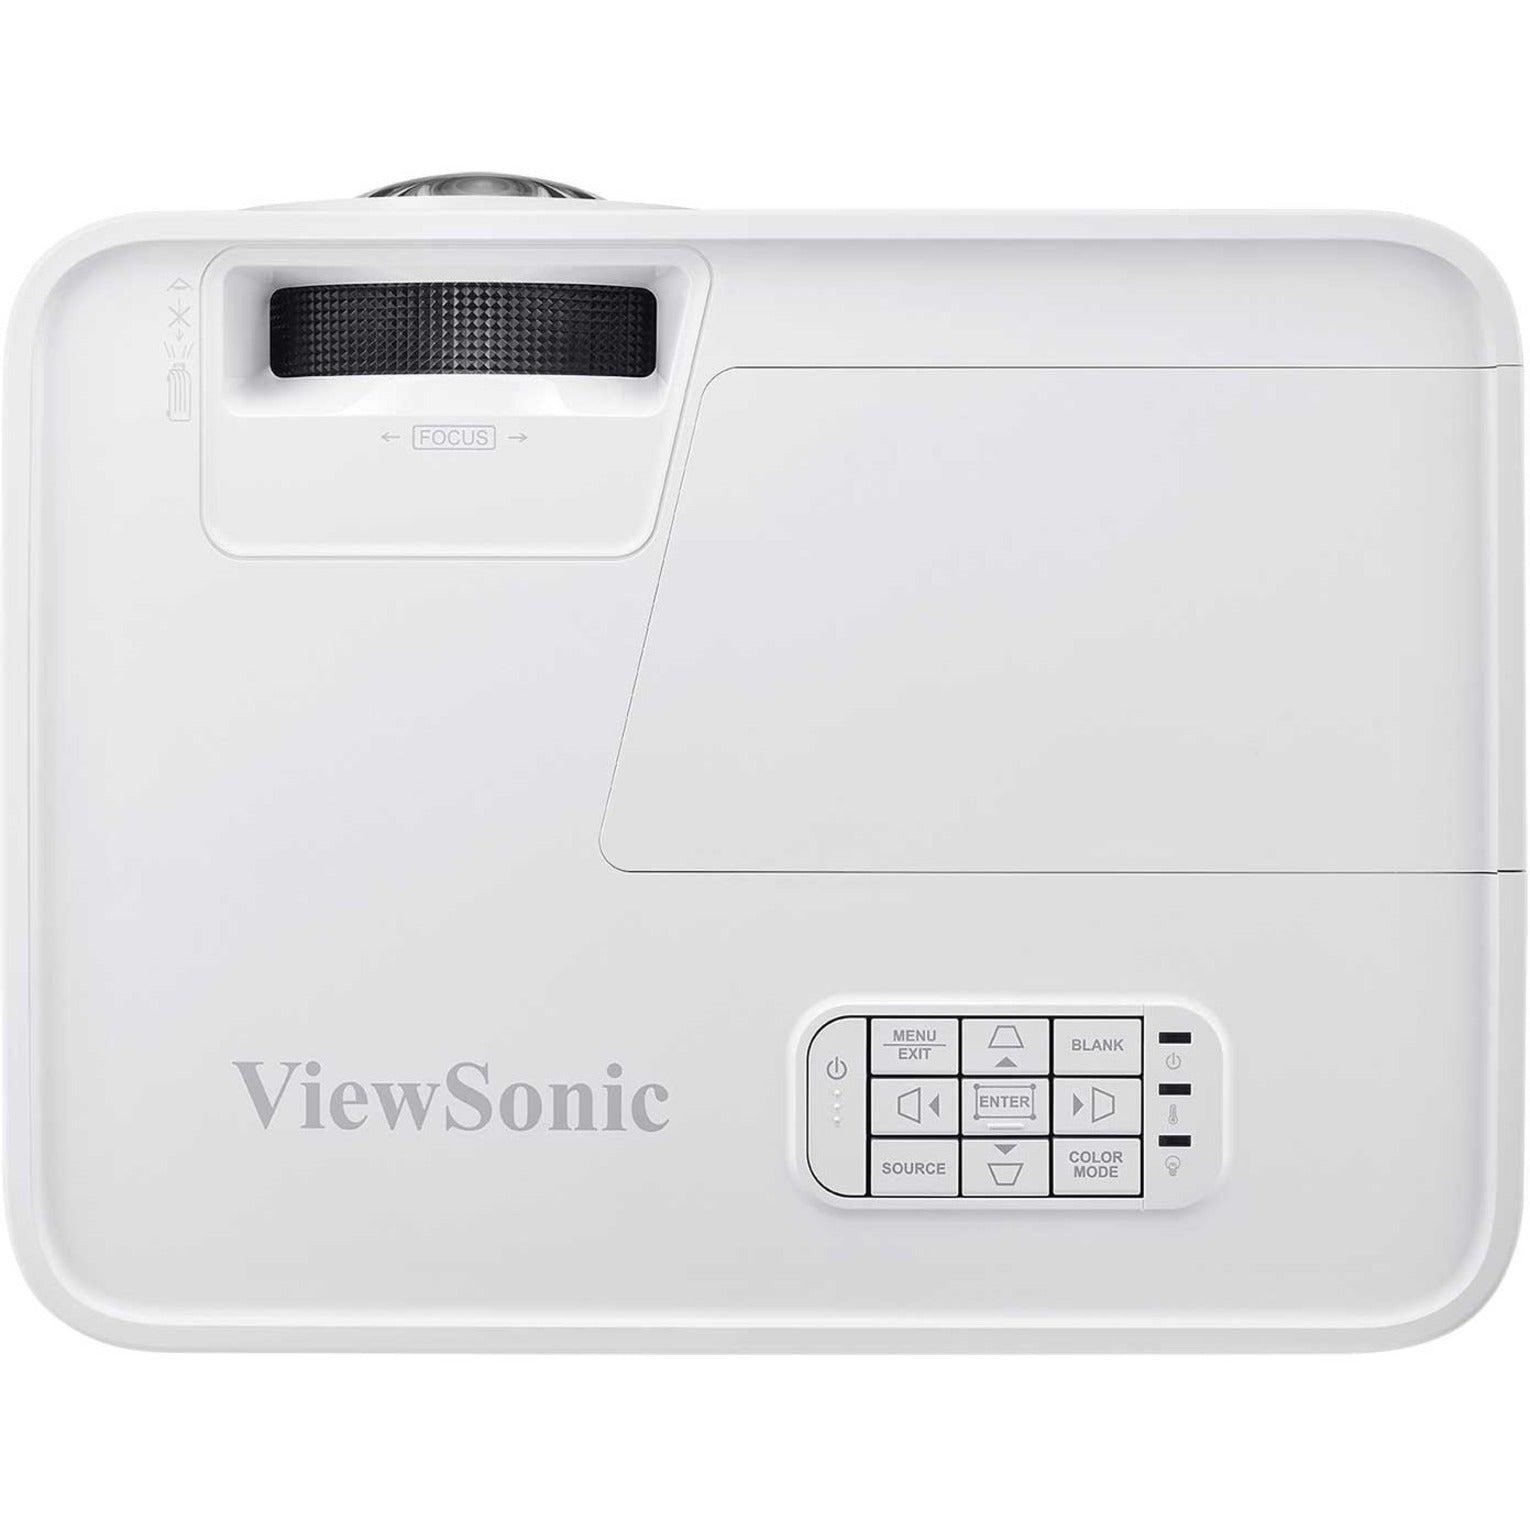 ViewSonic PS600X DLP Projector for Business and Education, Short Throw, 3,500 Lumens, XGA 1024x768 Resolution